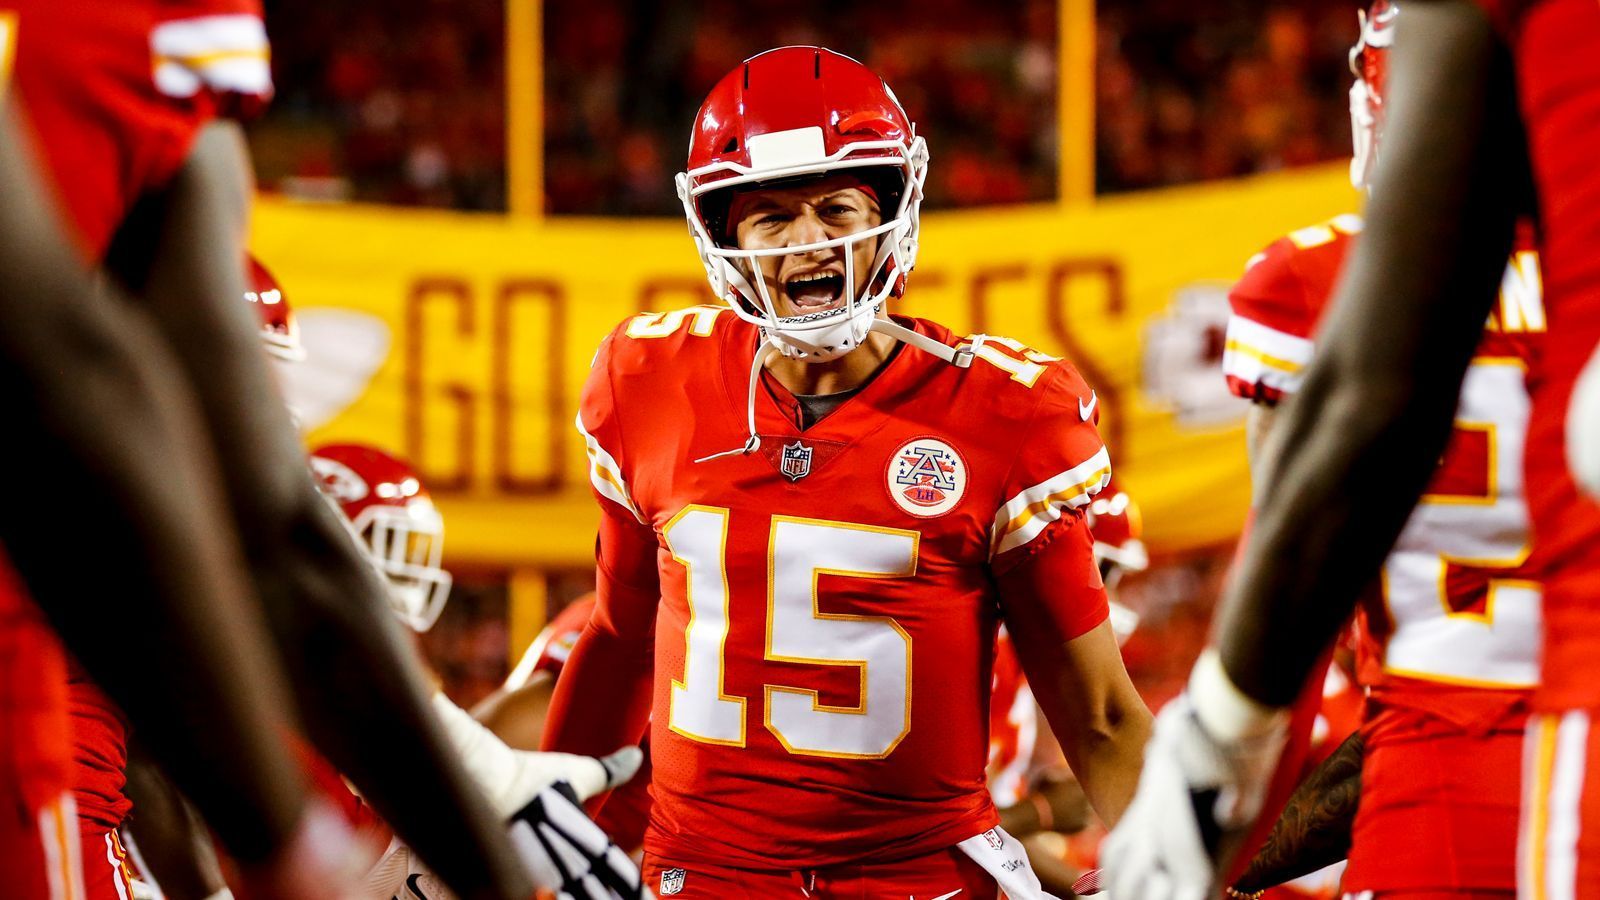 
                <strong>Kansas City Chiefs </strong><br>
                &#x2022; 2. Runde (Pick 58: Nick Bolton, Pick 63: Creed Humphrey) - <br>&#x2022; 4. Runde (Pick 144: Joshua Kaindoh) - <br>&#x2022; 5. Runde (Pick 162: Noah Gray, Pick 181: Cornell Powell) - <br>&#x2022; 6. Runde (Pick 226: Trey Smith) <br>
              